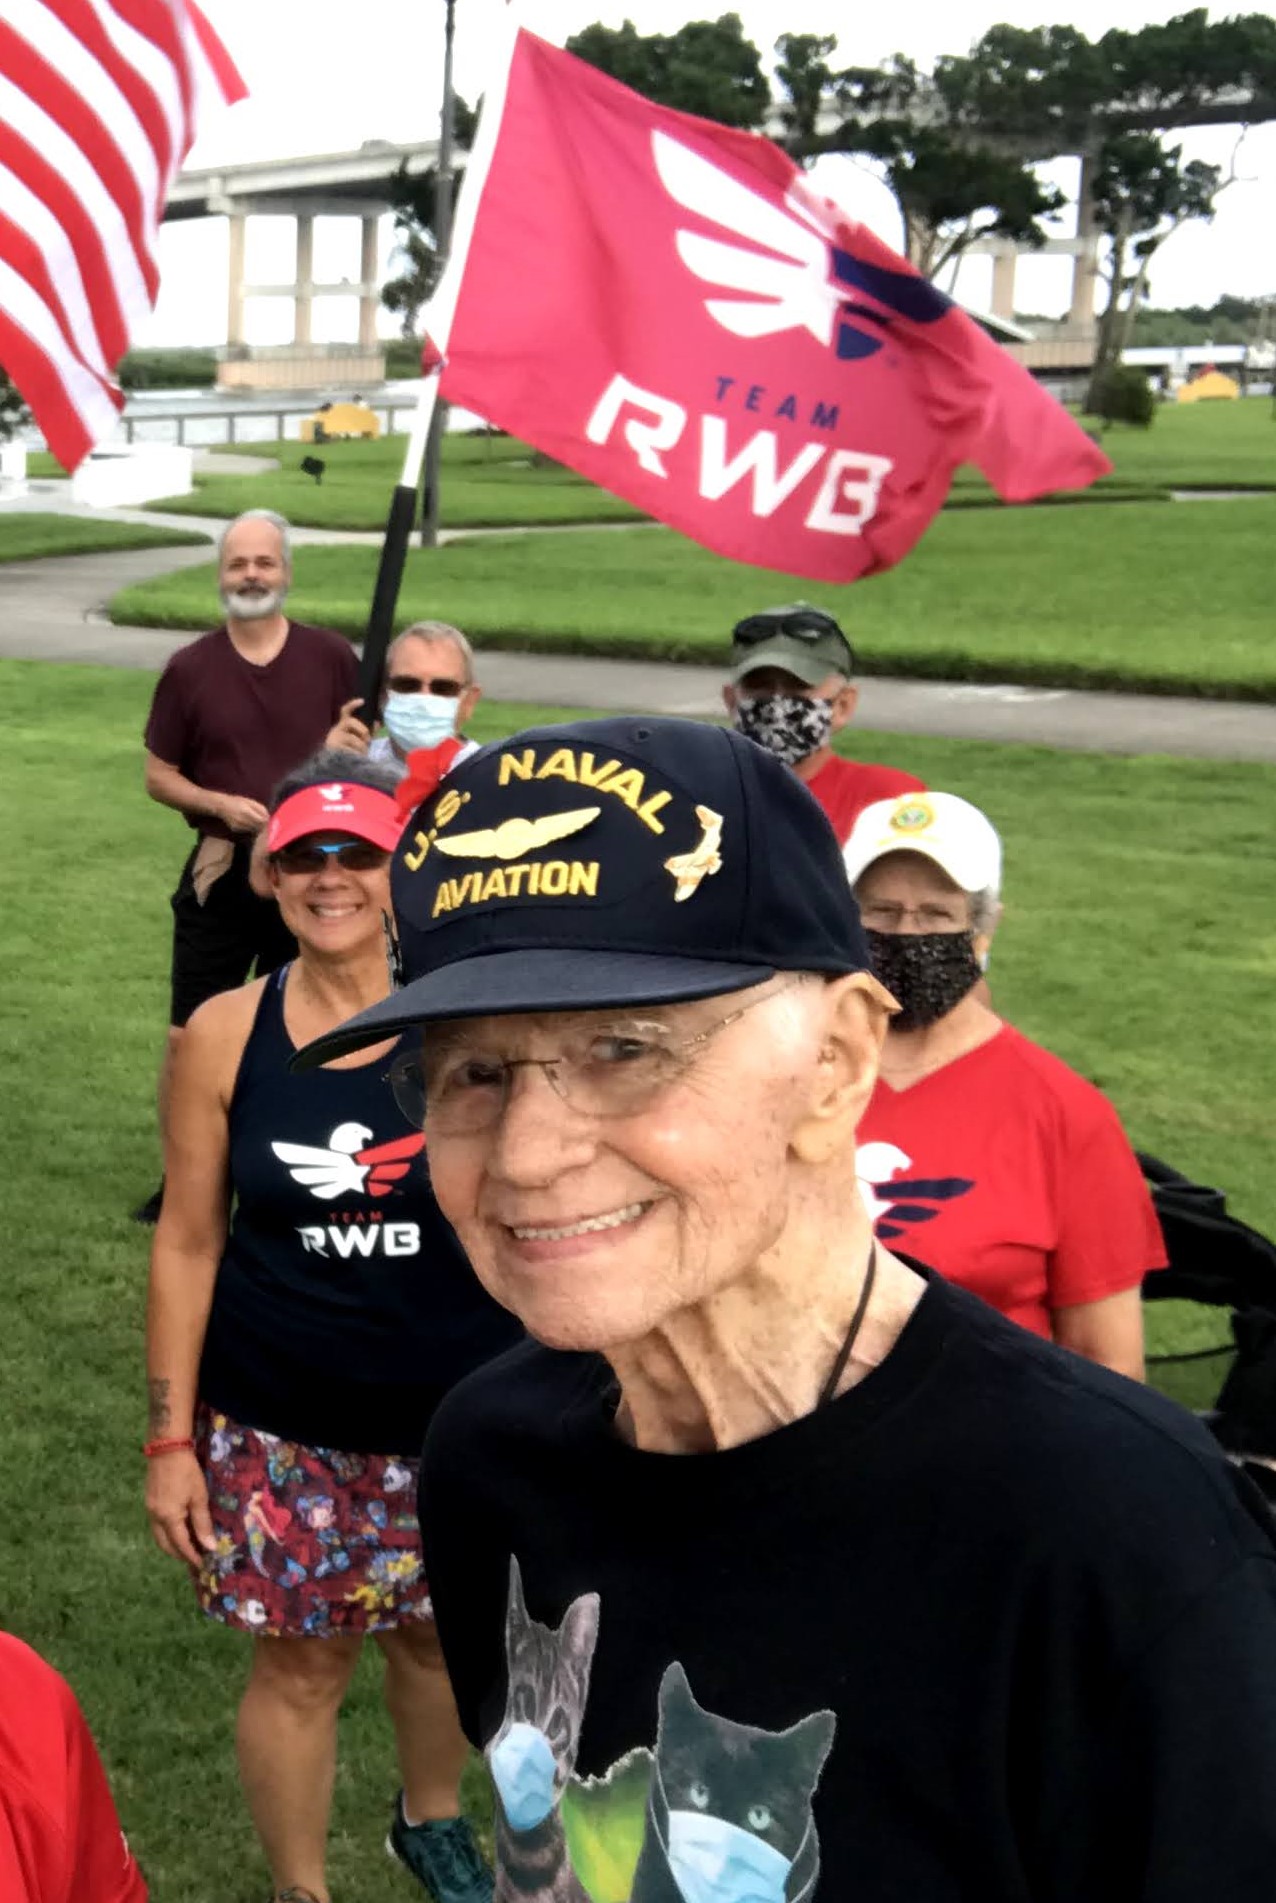 Team Red, While & Blue Eagles will dearly miss Ralph & his smile. We thank him & his family for his service to our Nation and for his never ending support of Veterans, especially Team RWB. Ralph is relieved of his watch - we now have the watch. Fair Winds & Following Seas, Shipmate.